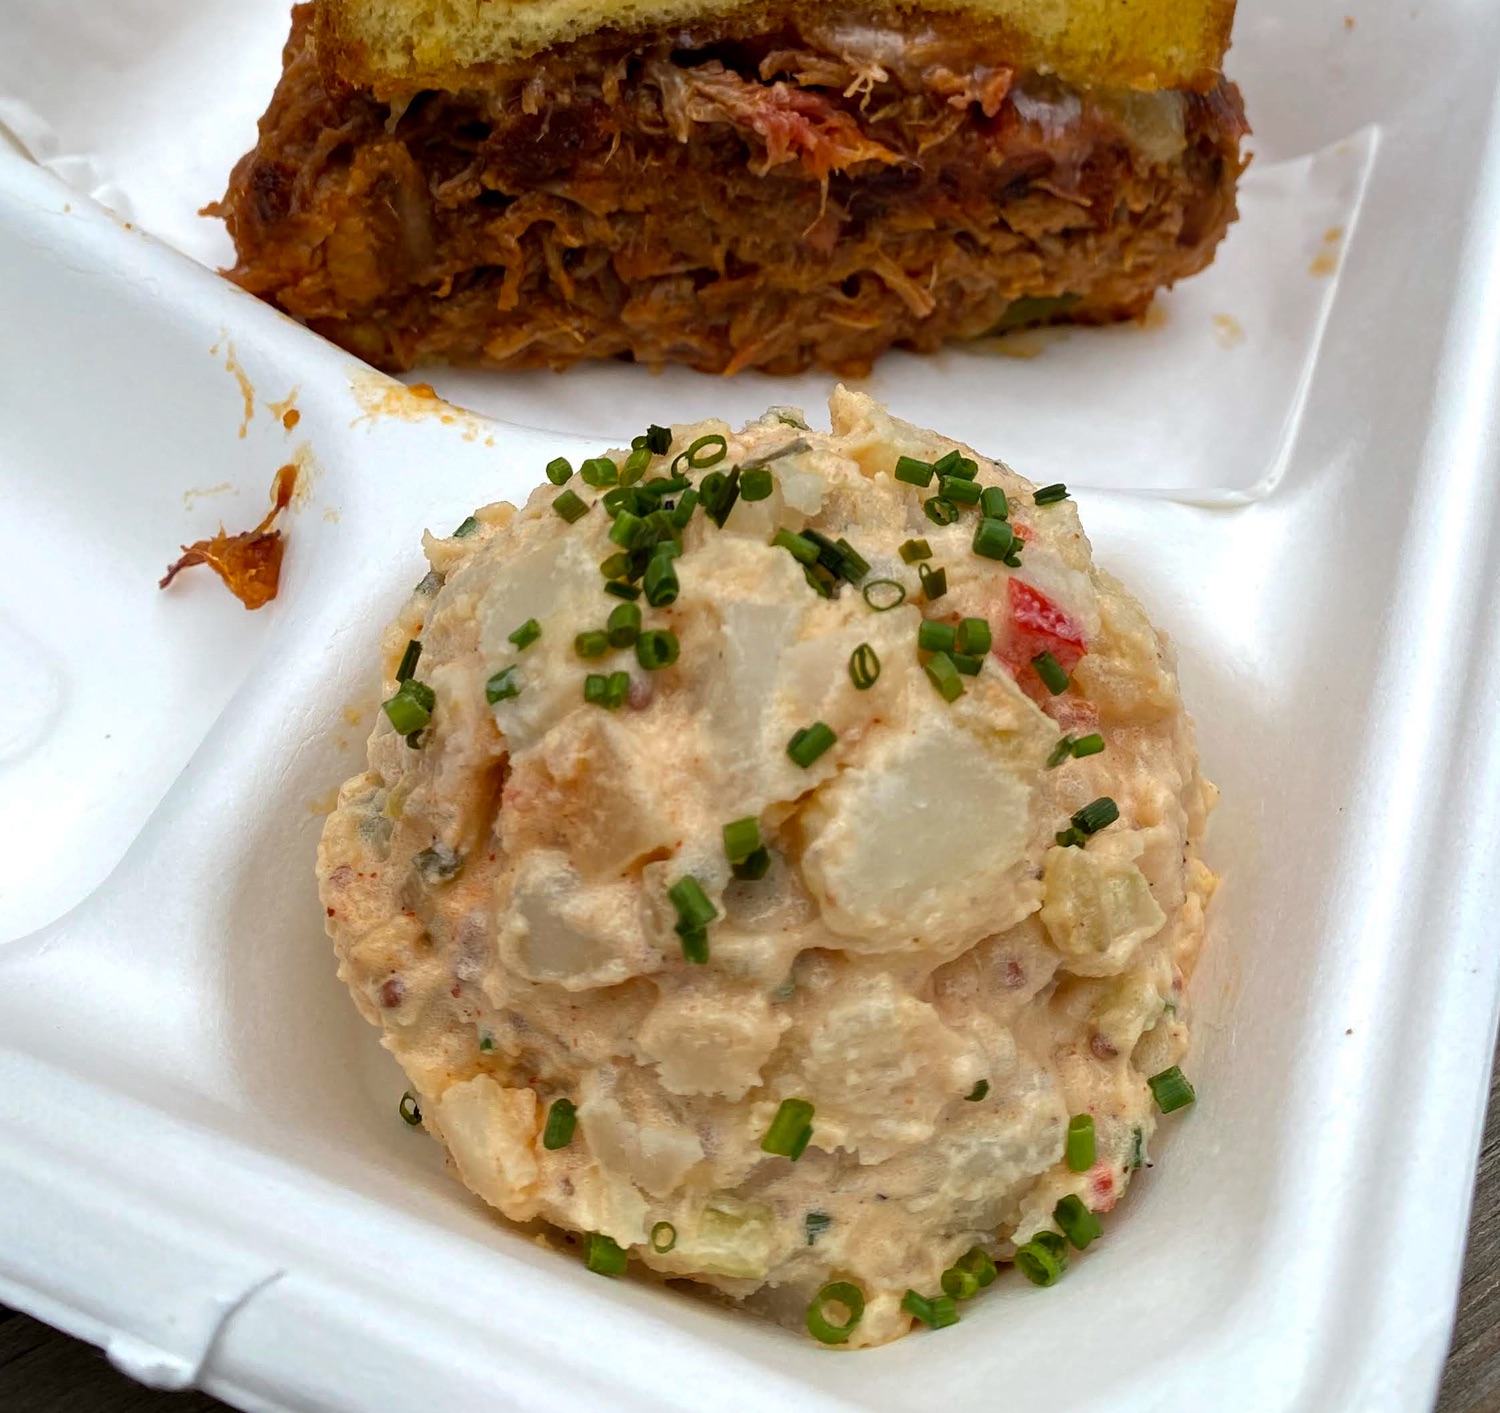 The Porky Melt at The Dinner Bell Barbecue Food Cart – A Culinary Treasure! Culinary Treasure Network Steven Shomler 